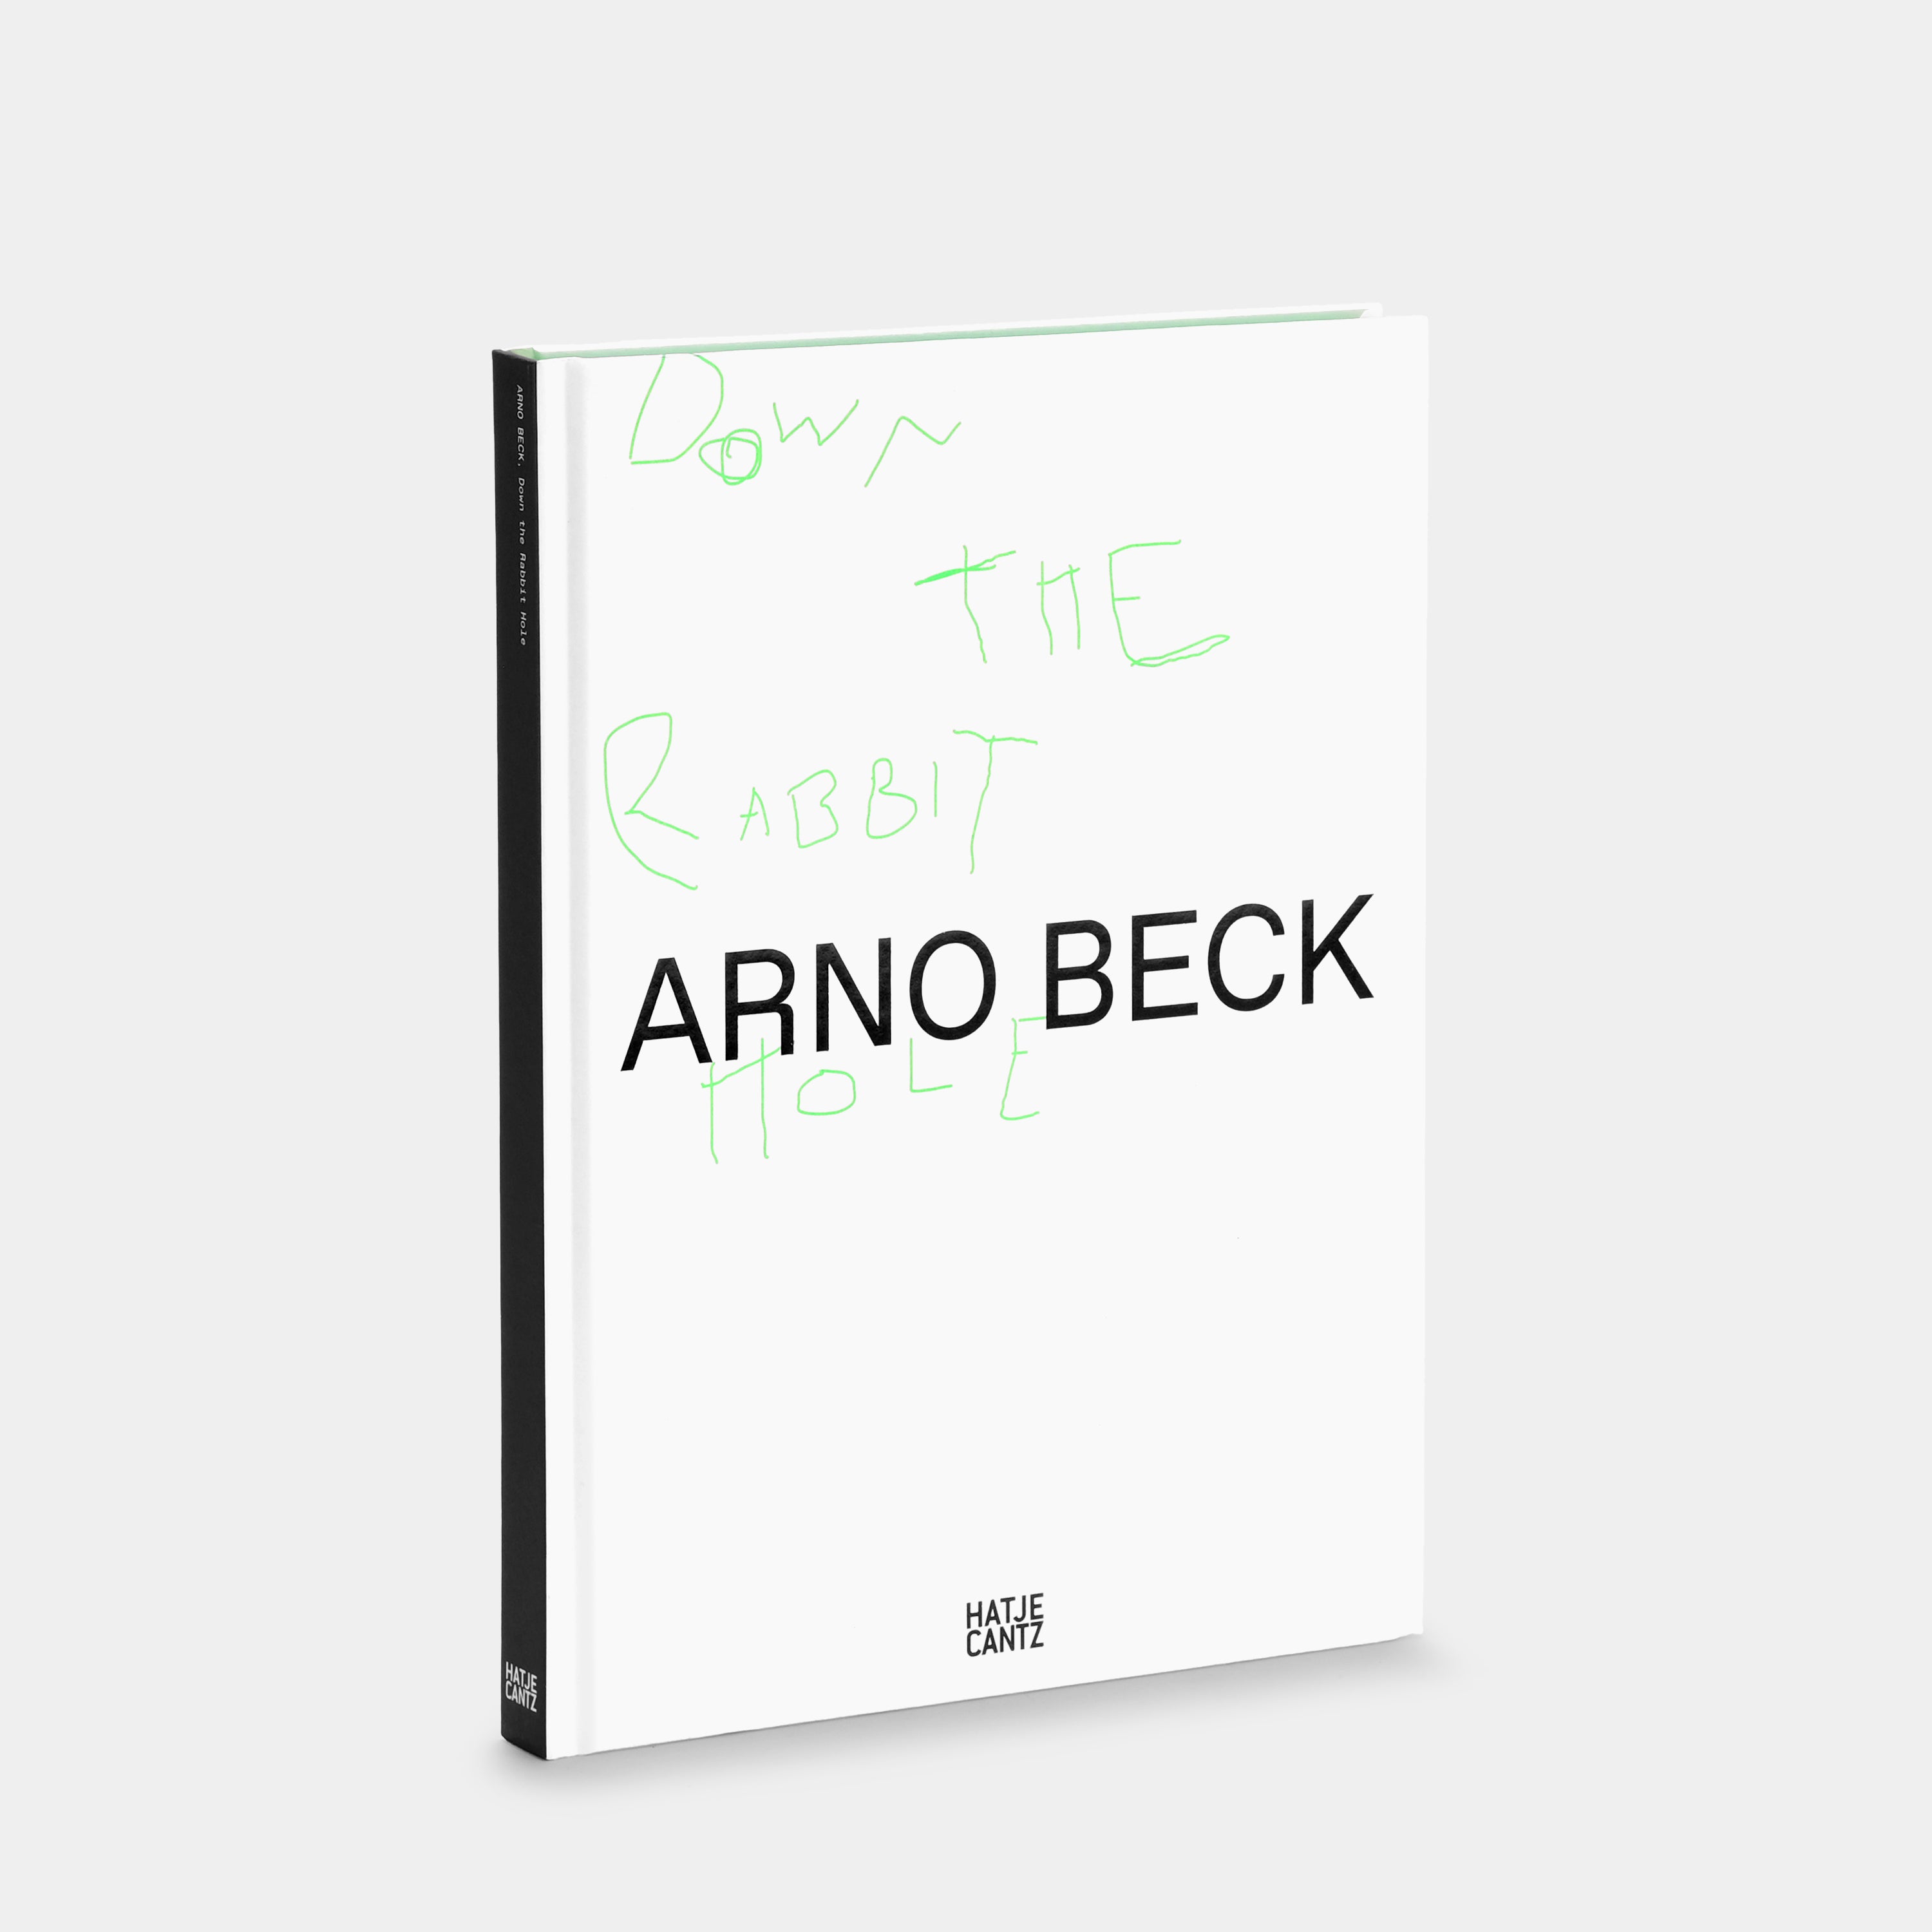 Arno Beck: Down the Rabbit Hole Book